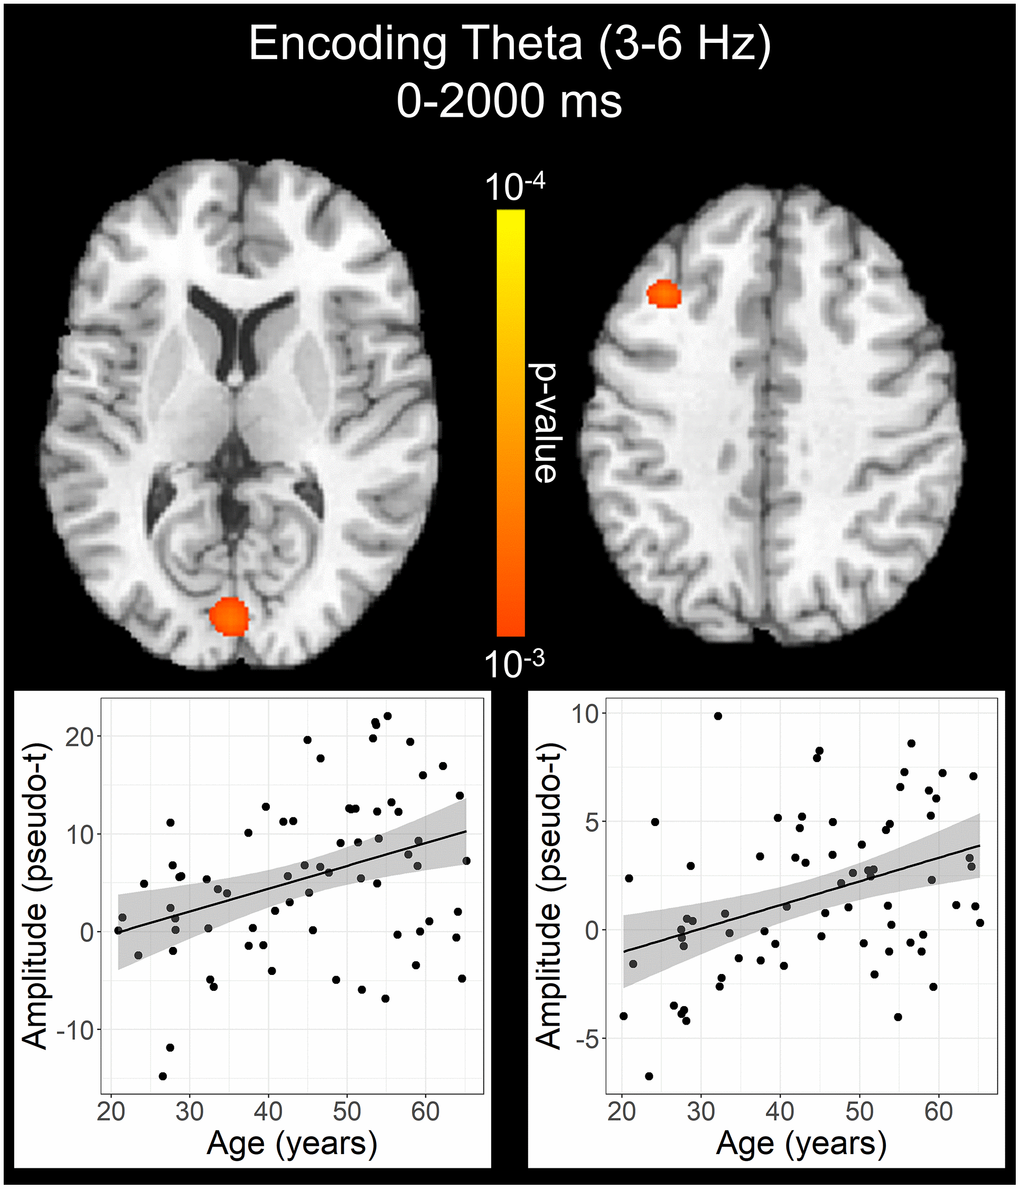 Effect of age on theta oscillations during the encoding phase. Whole-brain linear regression analysis revealed that theta activity increased in the left primary visual cortex and left dlPFC with older age. Linear regression plots of peak voxel pseudo-t values are shown as a function of age. Lines of best-fit and 95% CI (shaded area) are overlaid.